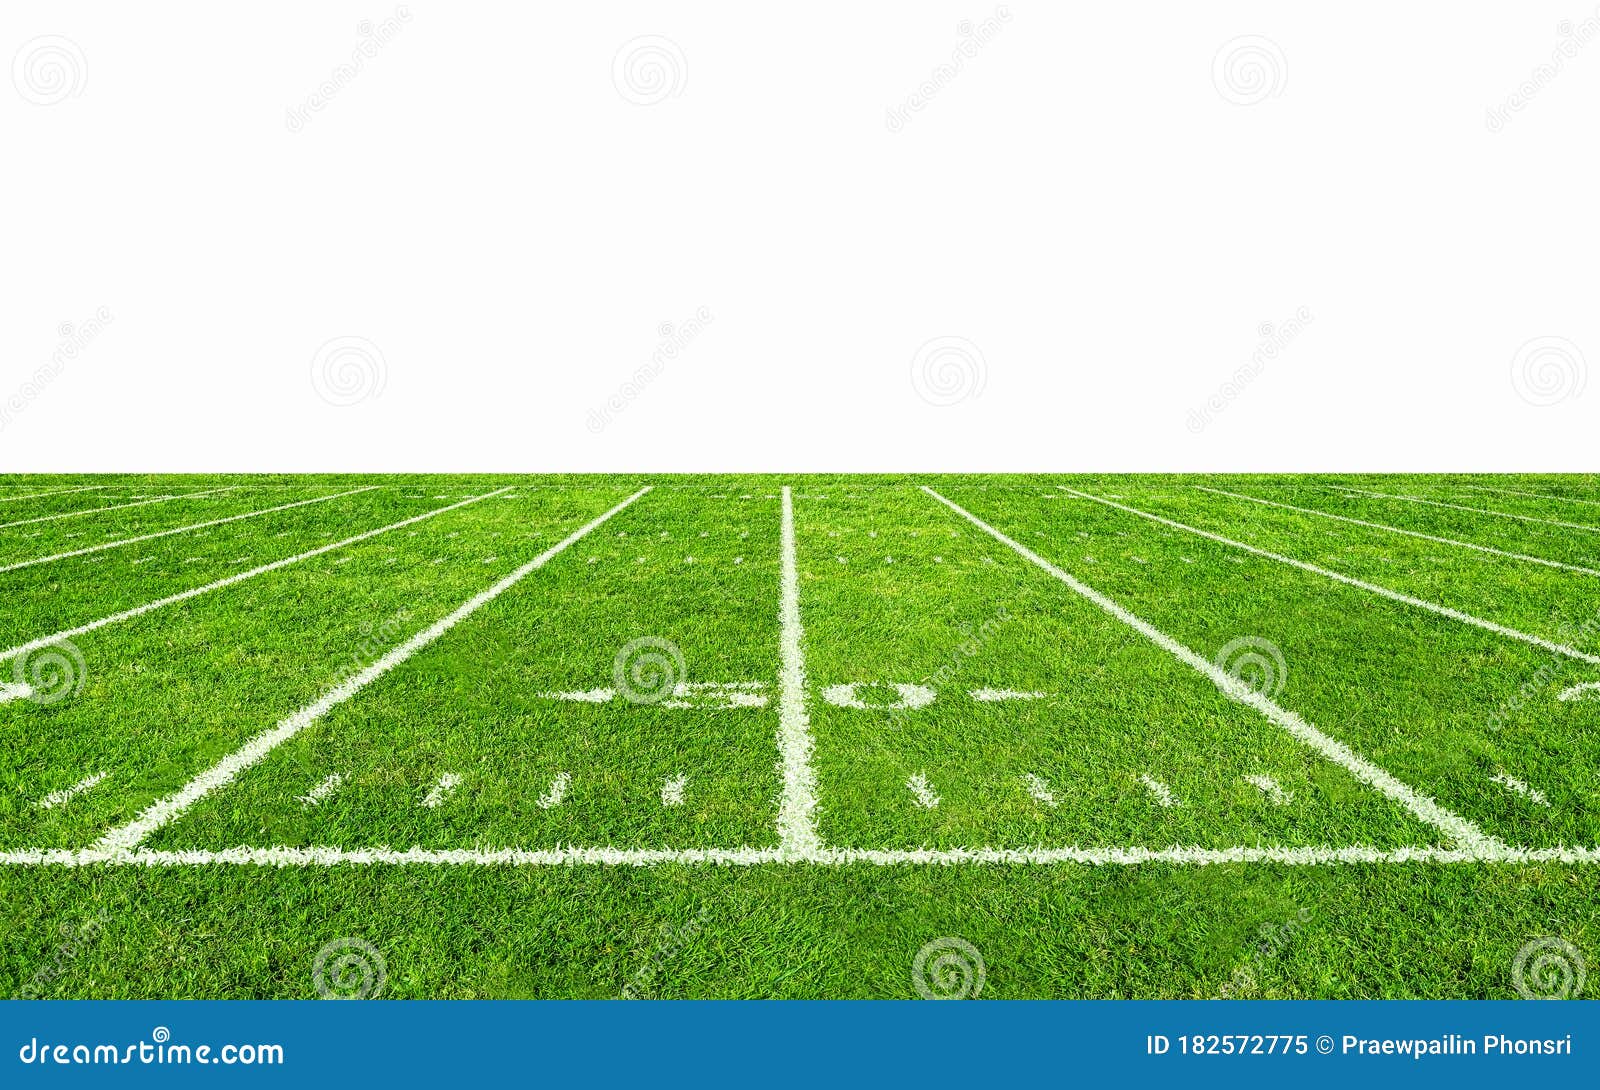 American Football Field With Line. American Football Stadium With Grass  Pattern Stock Image - Image Of Pattern, Arena: 182572775